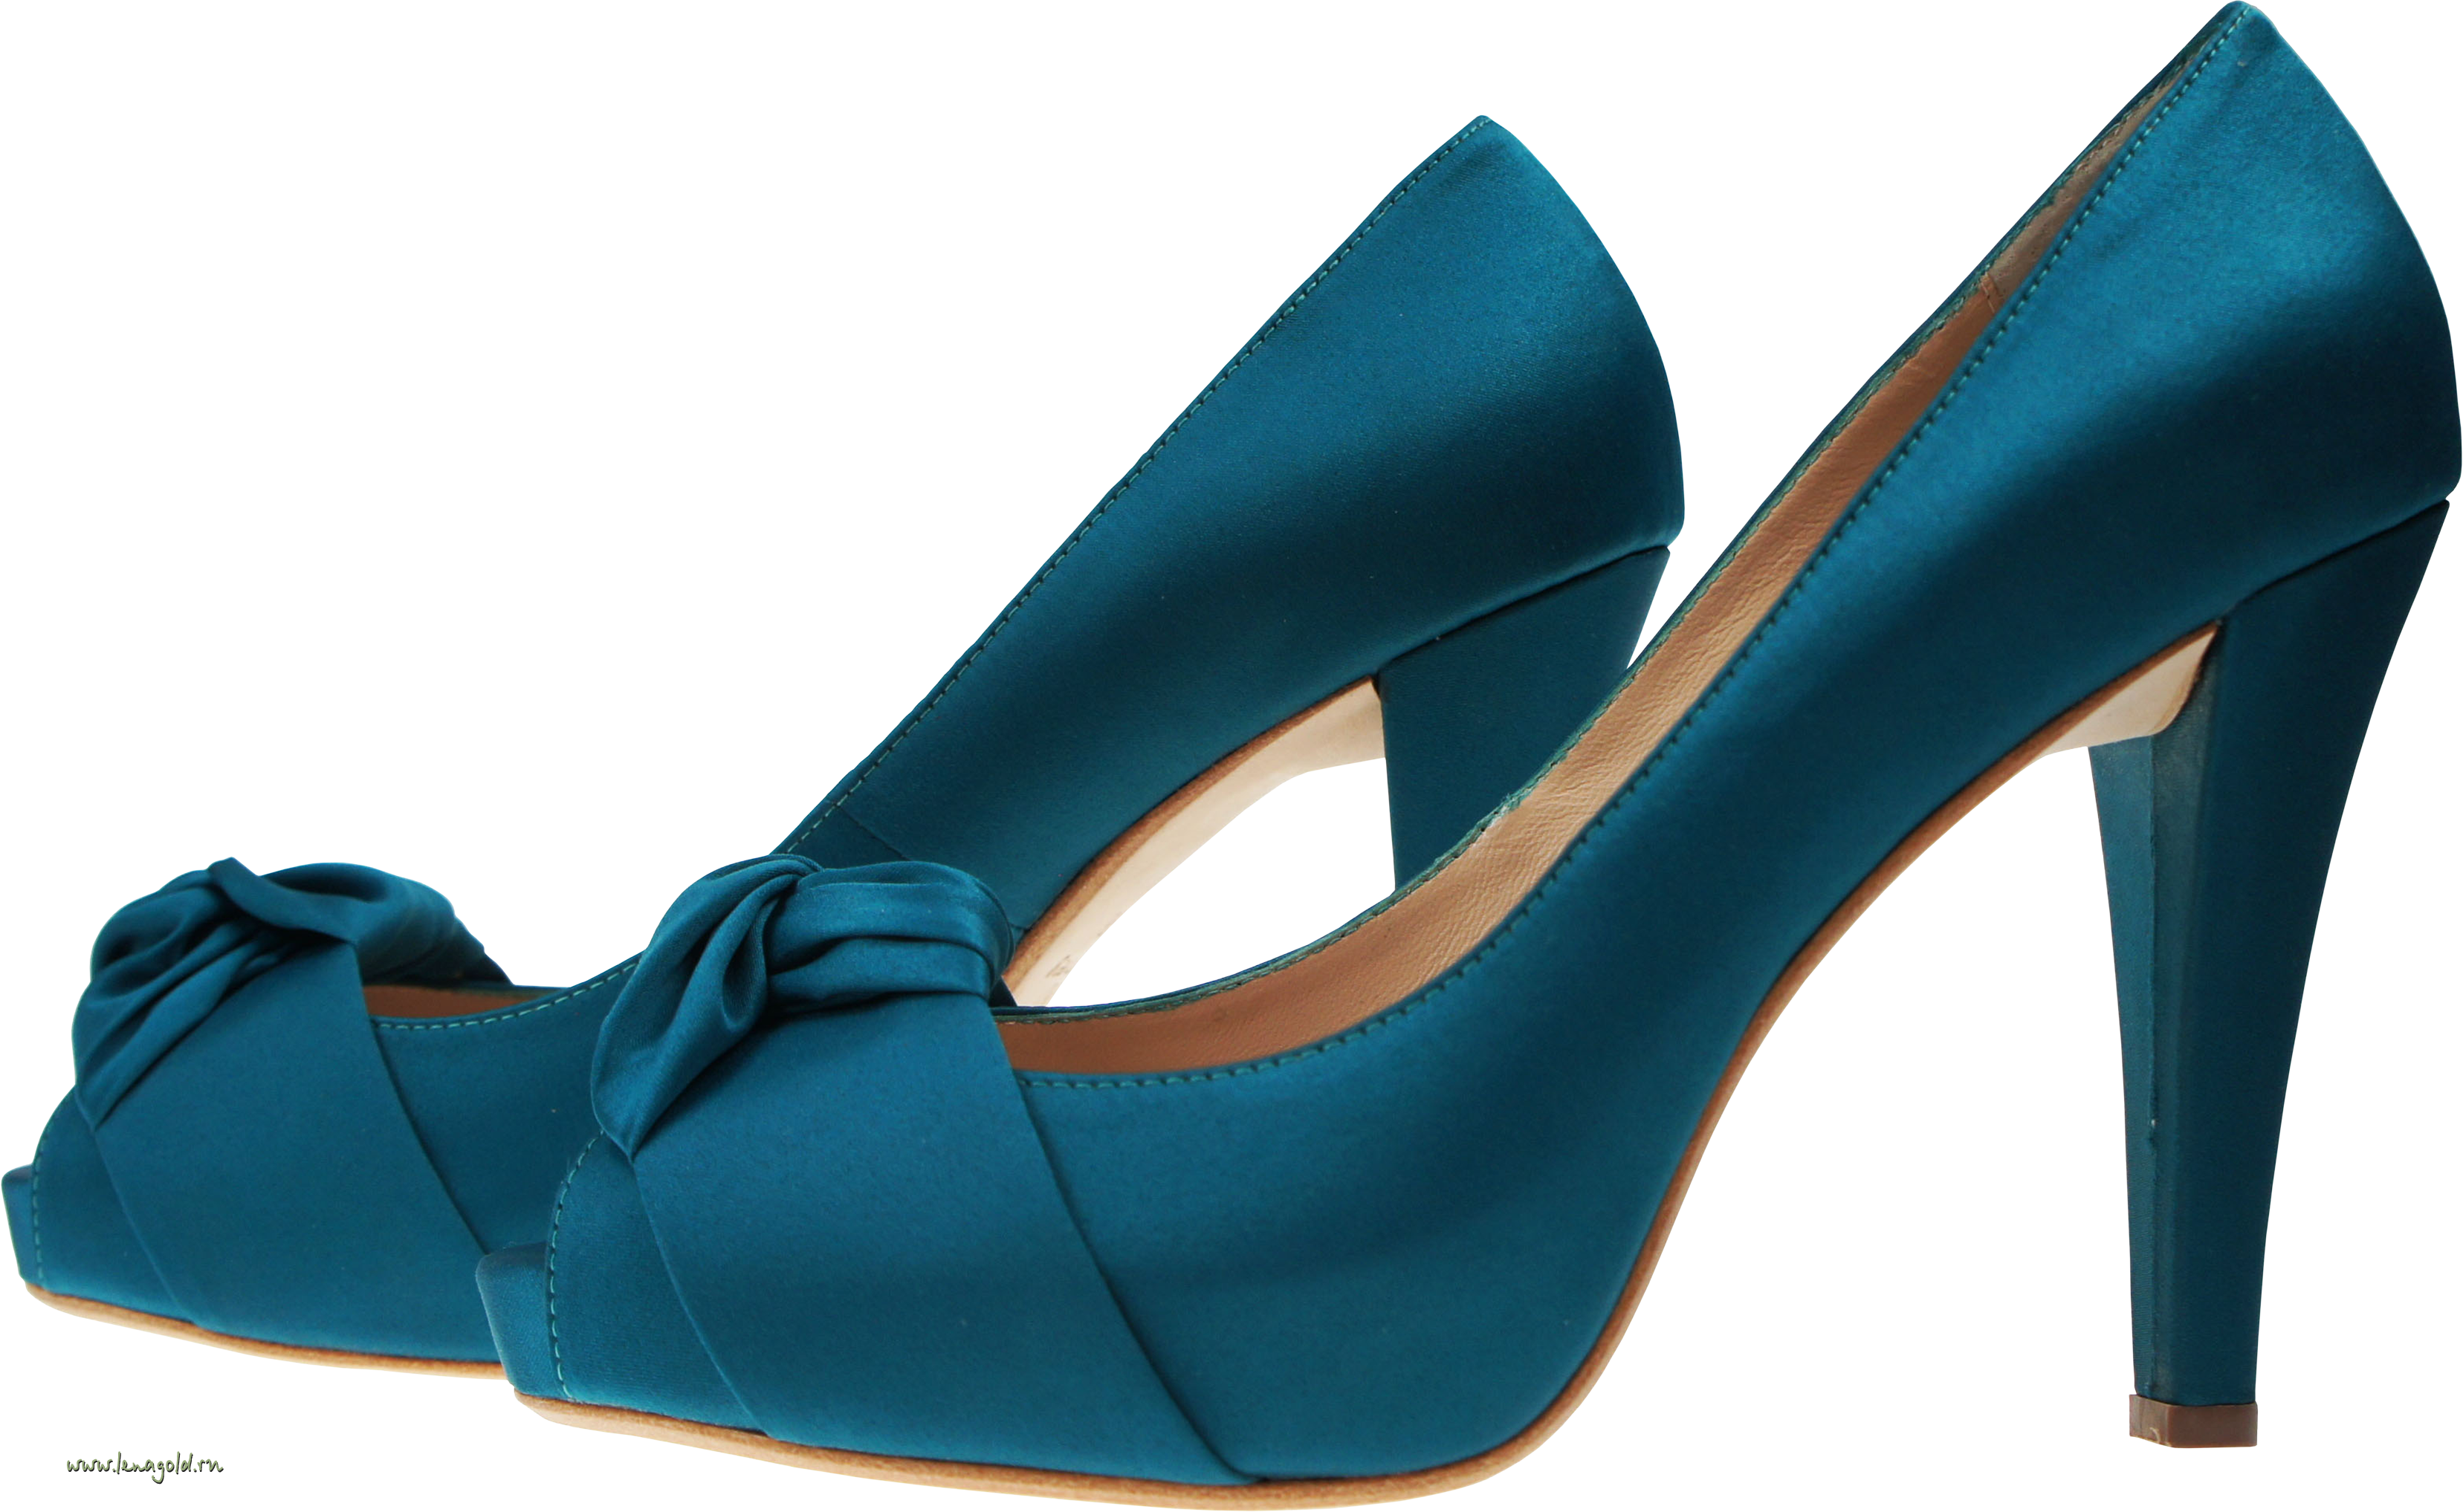 Women shoes PNG images free download pictures